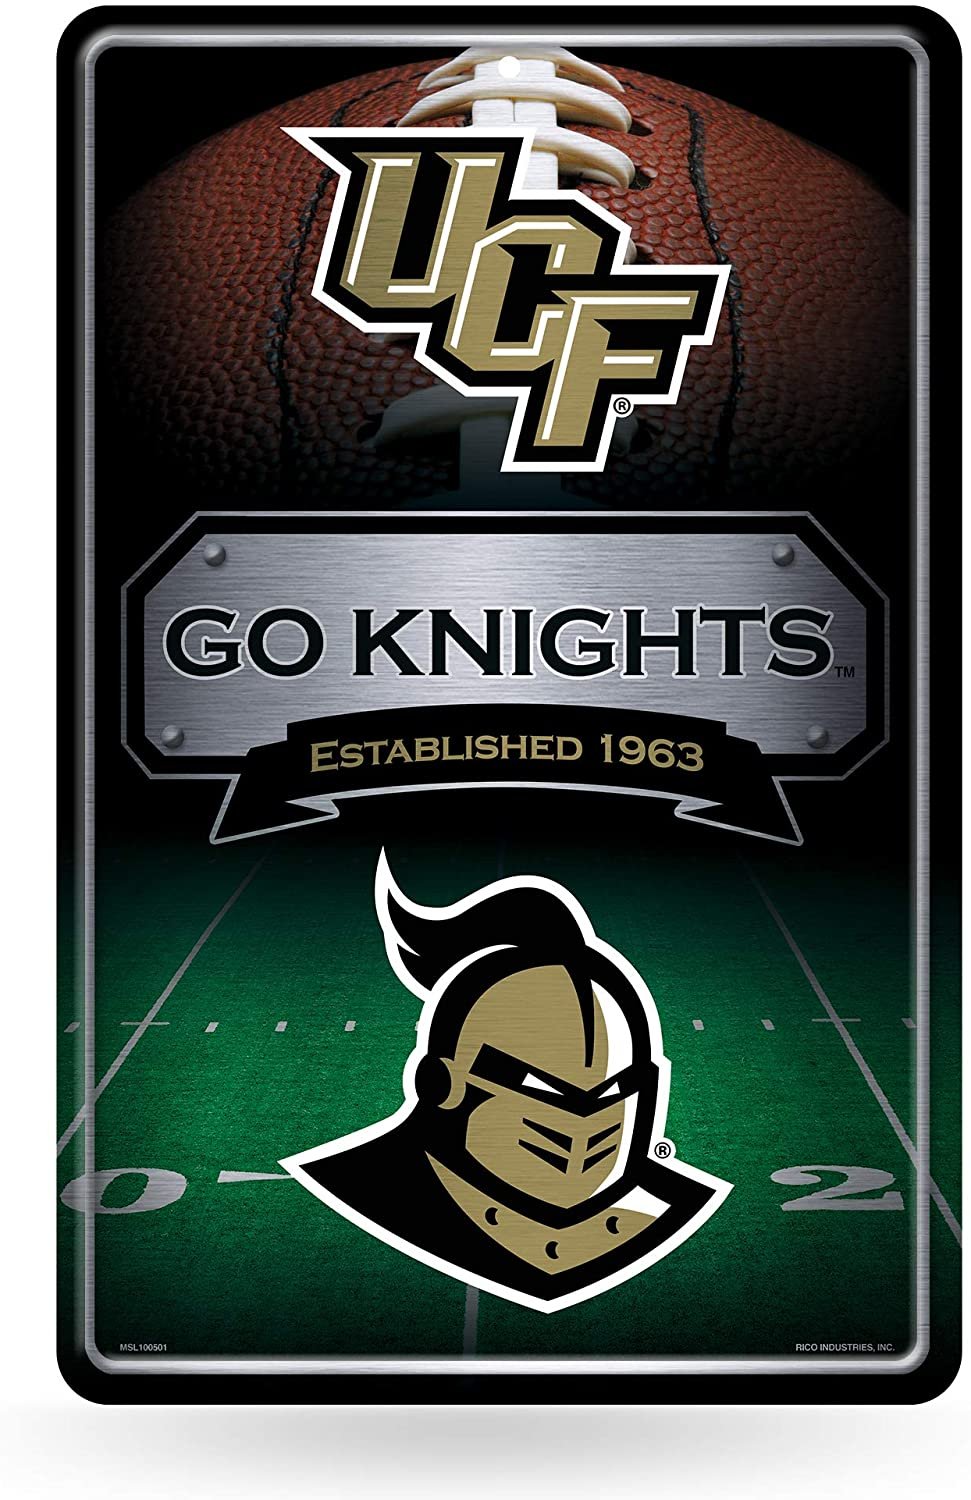 University of Central Florida UCF Knights Large 11x17 Premium Metal Wall Novelty Parking Sign